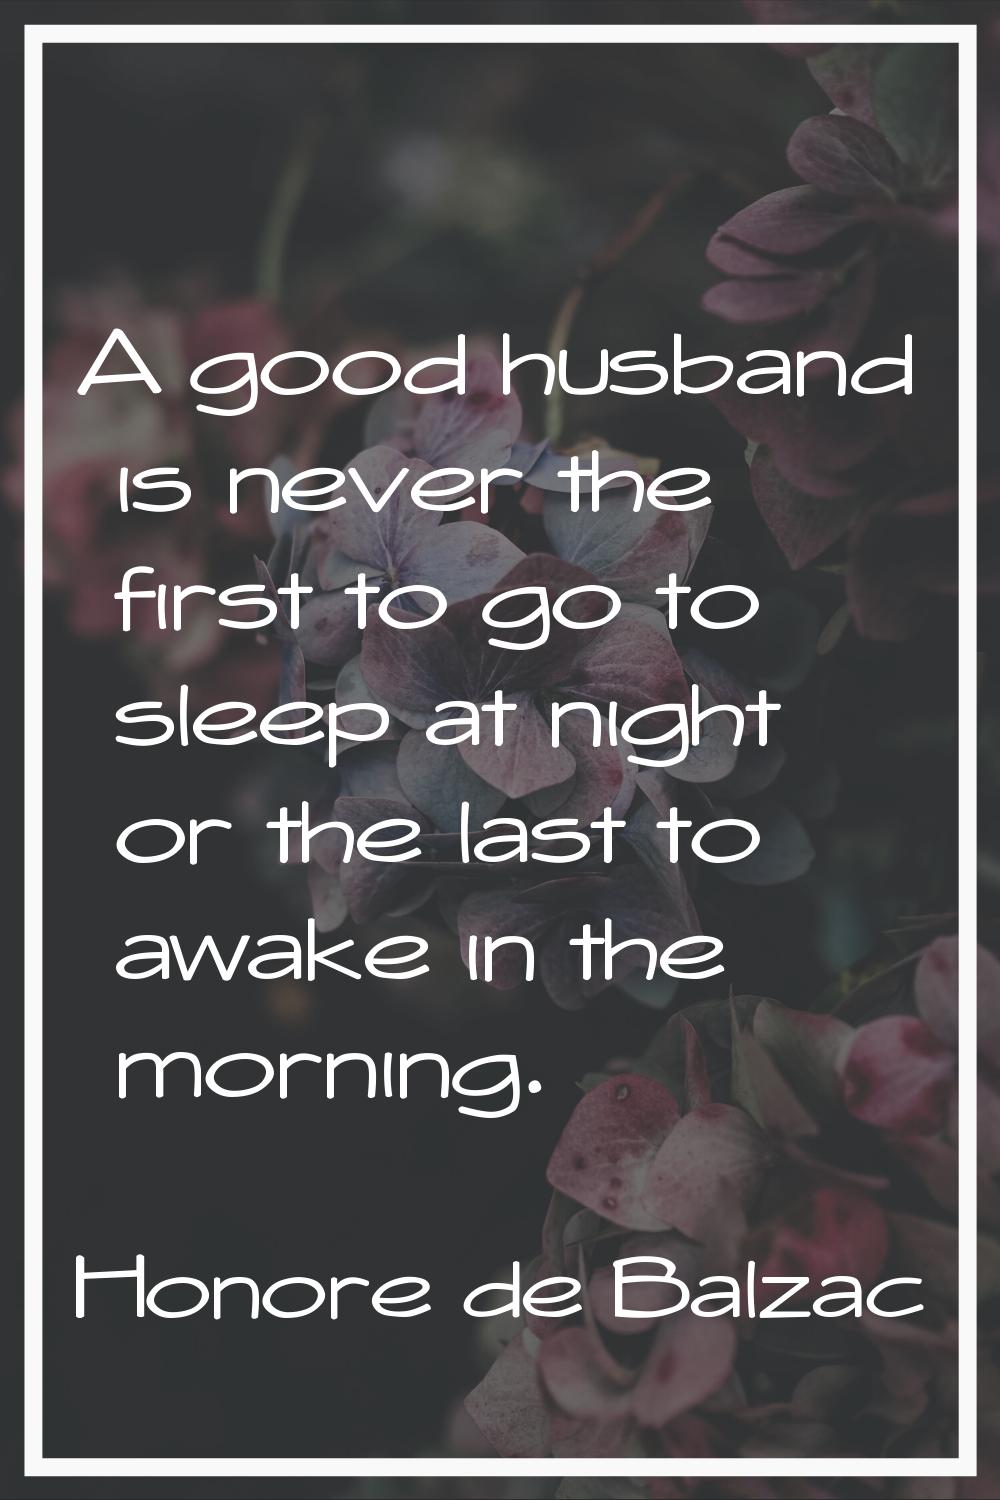 A good husband is never the first to go to sleep at night or the last to awake in the morning.